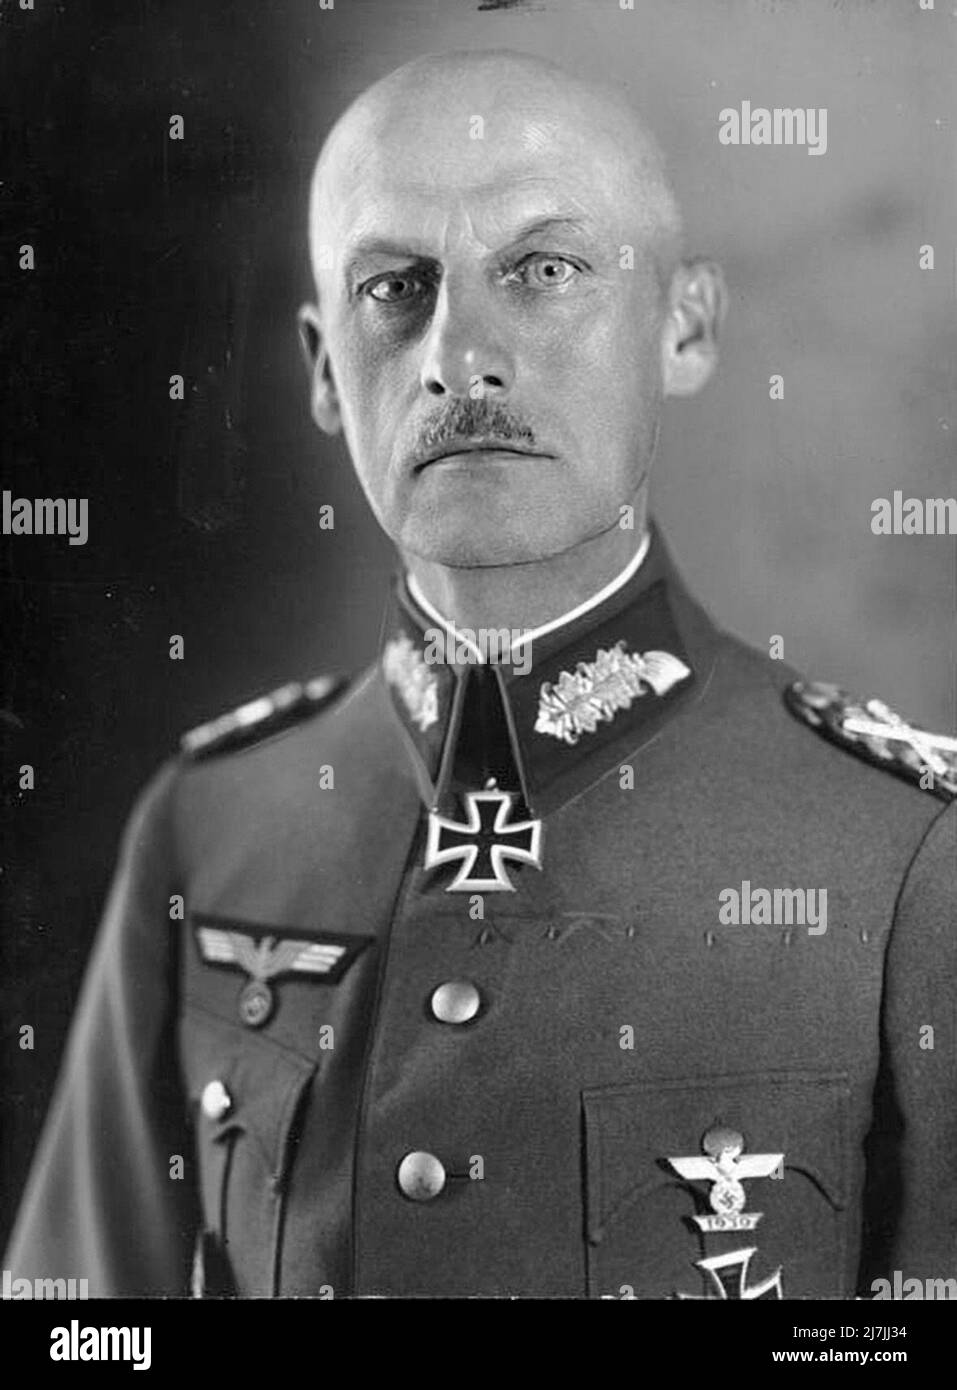 Wilhelm Josef Franz Ritter von Leeb was a German field marshal in World War II. In the Invasion of France, he commanded Army Group C, responsible for the breakthrough of the Maginot Line.  During Operation Barbarossa—the invasion of the Soviet Union—Leeb commanded Army Group North, eventually laying siege to the city. Units under Leeb’s command committed war crimes against the civilian population and closely cooperated with the SS Einsatzgruppen, death squads primarily tasked with the murder of the Jewish population as part of the Holocaust. Stock Photo